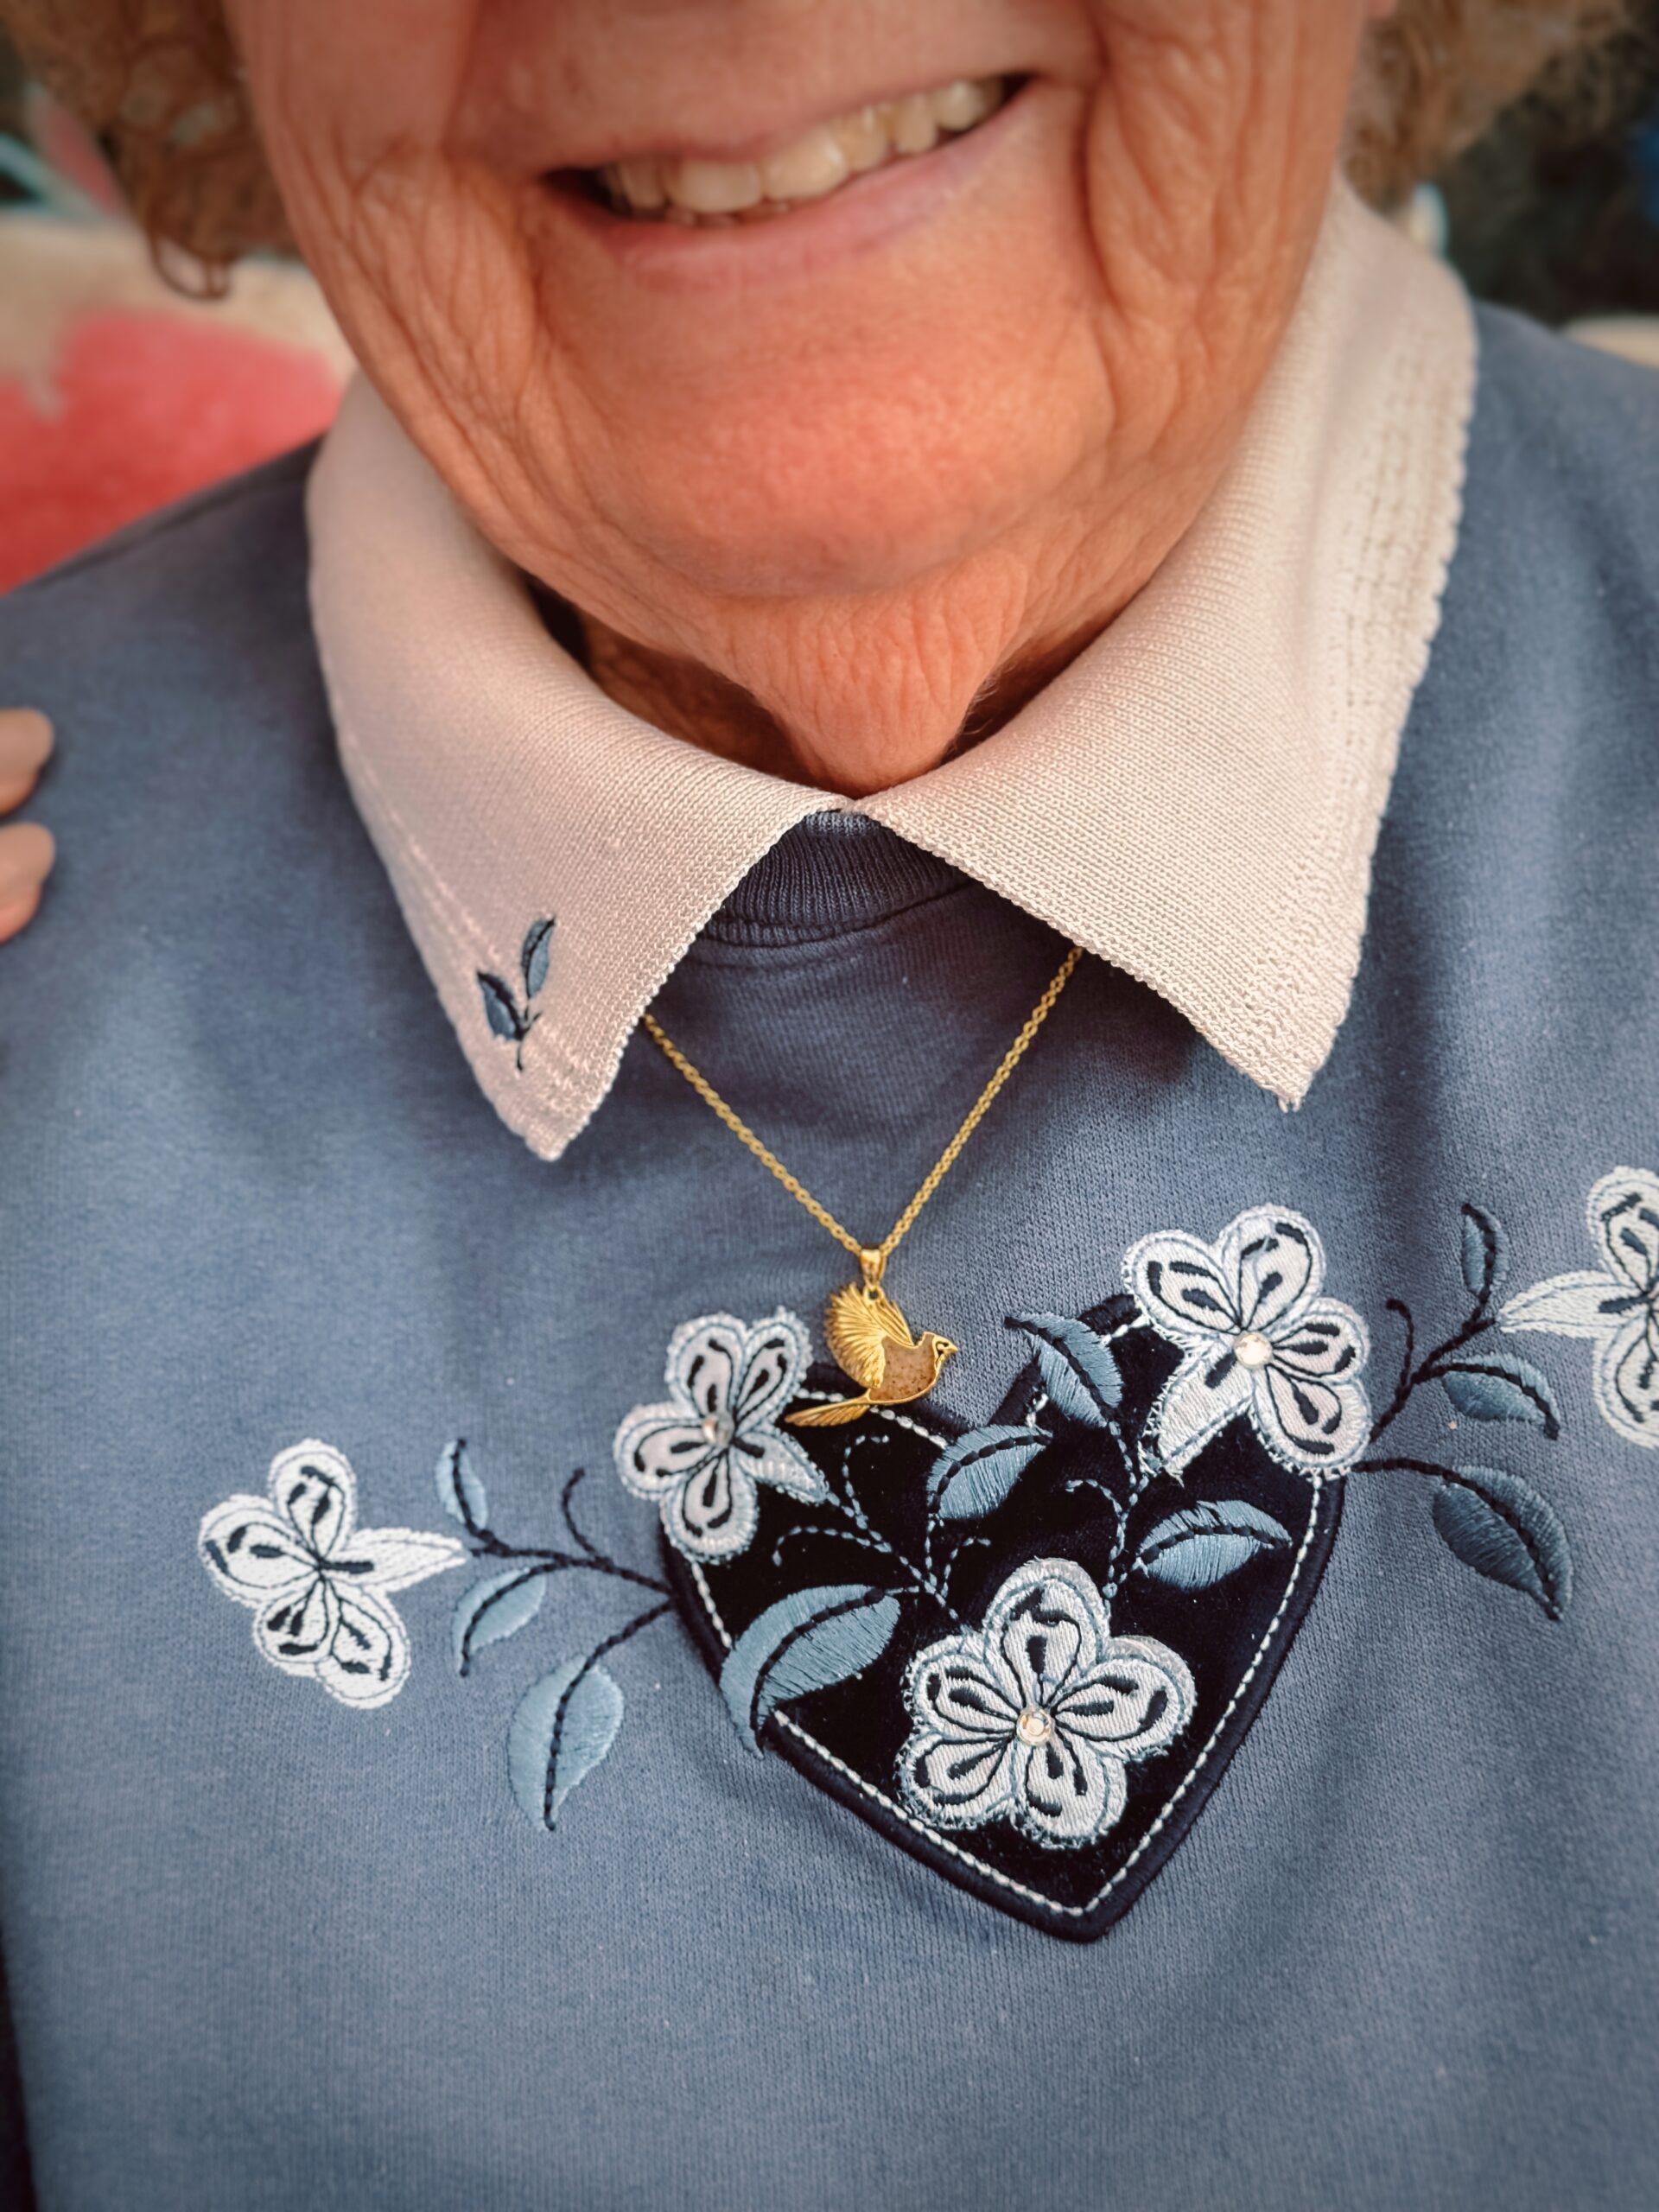 Close-up of Dune Jewelry's 14k Gold Vermeil Cardinal Necklace on the author's grandmother's neck. She is wearing a blue and white sweater.